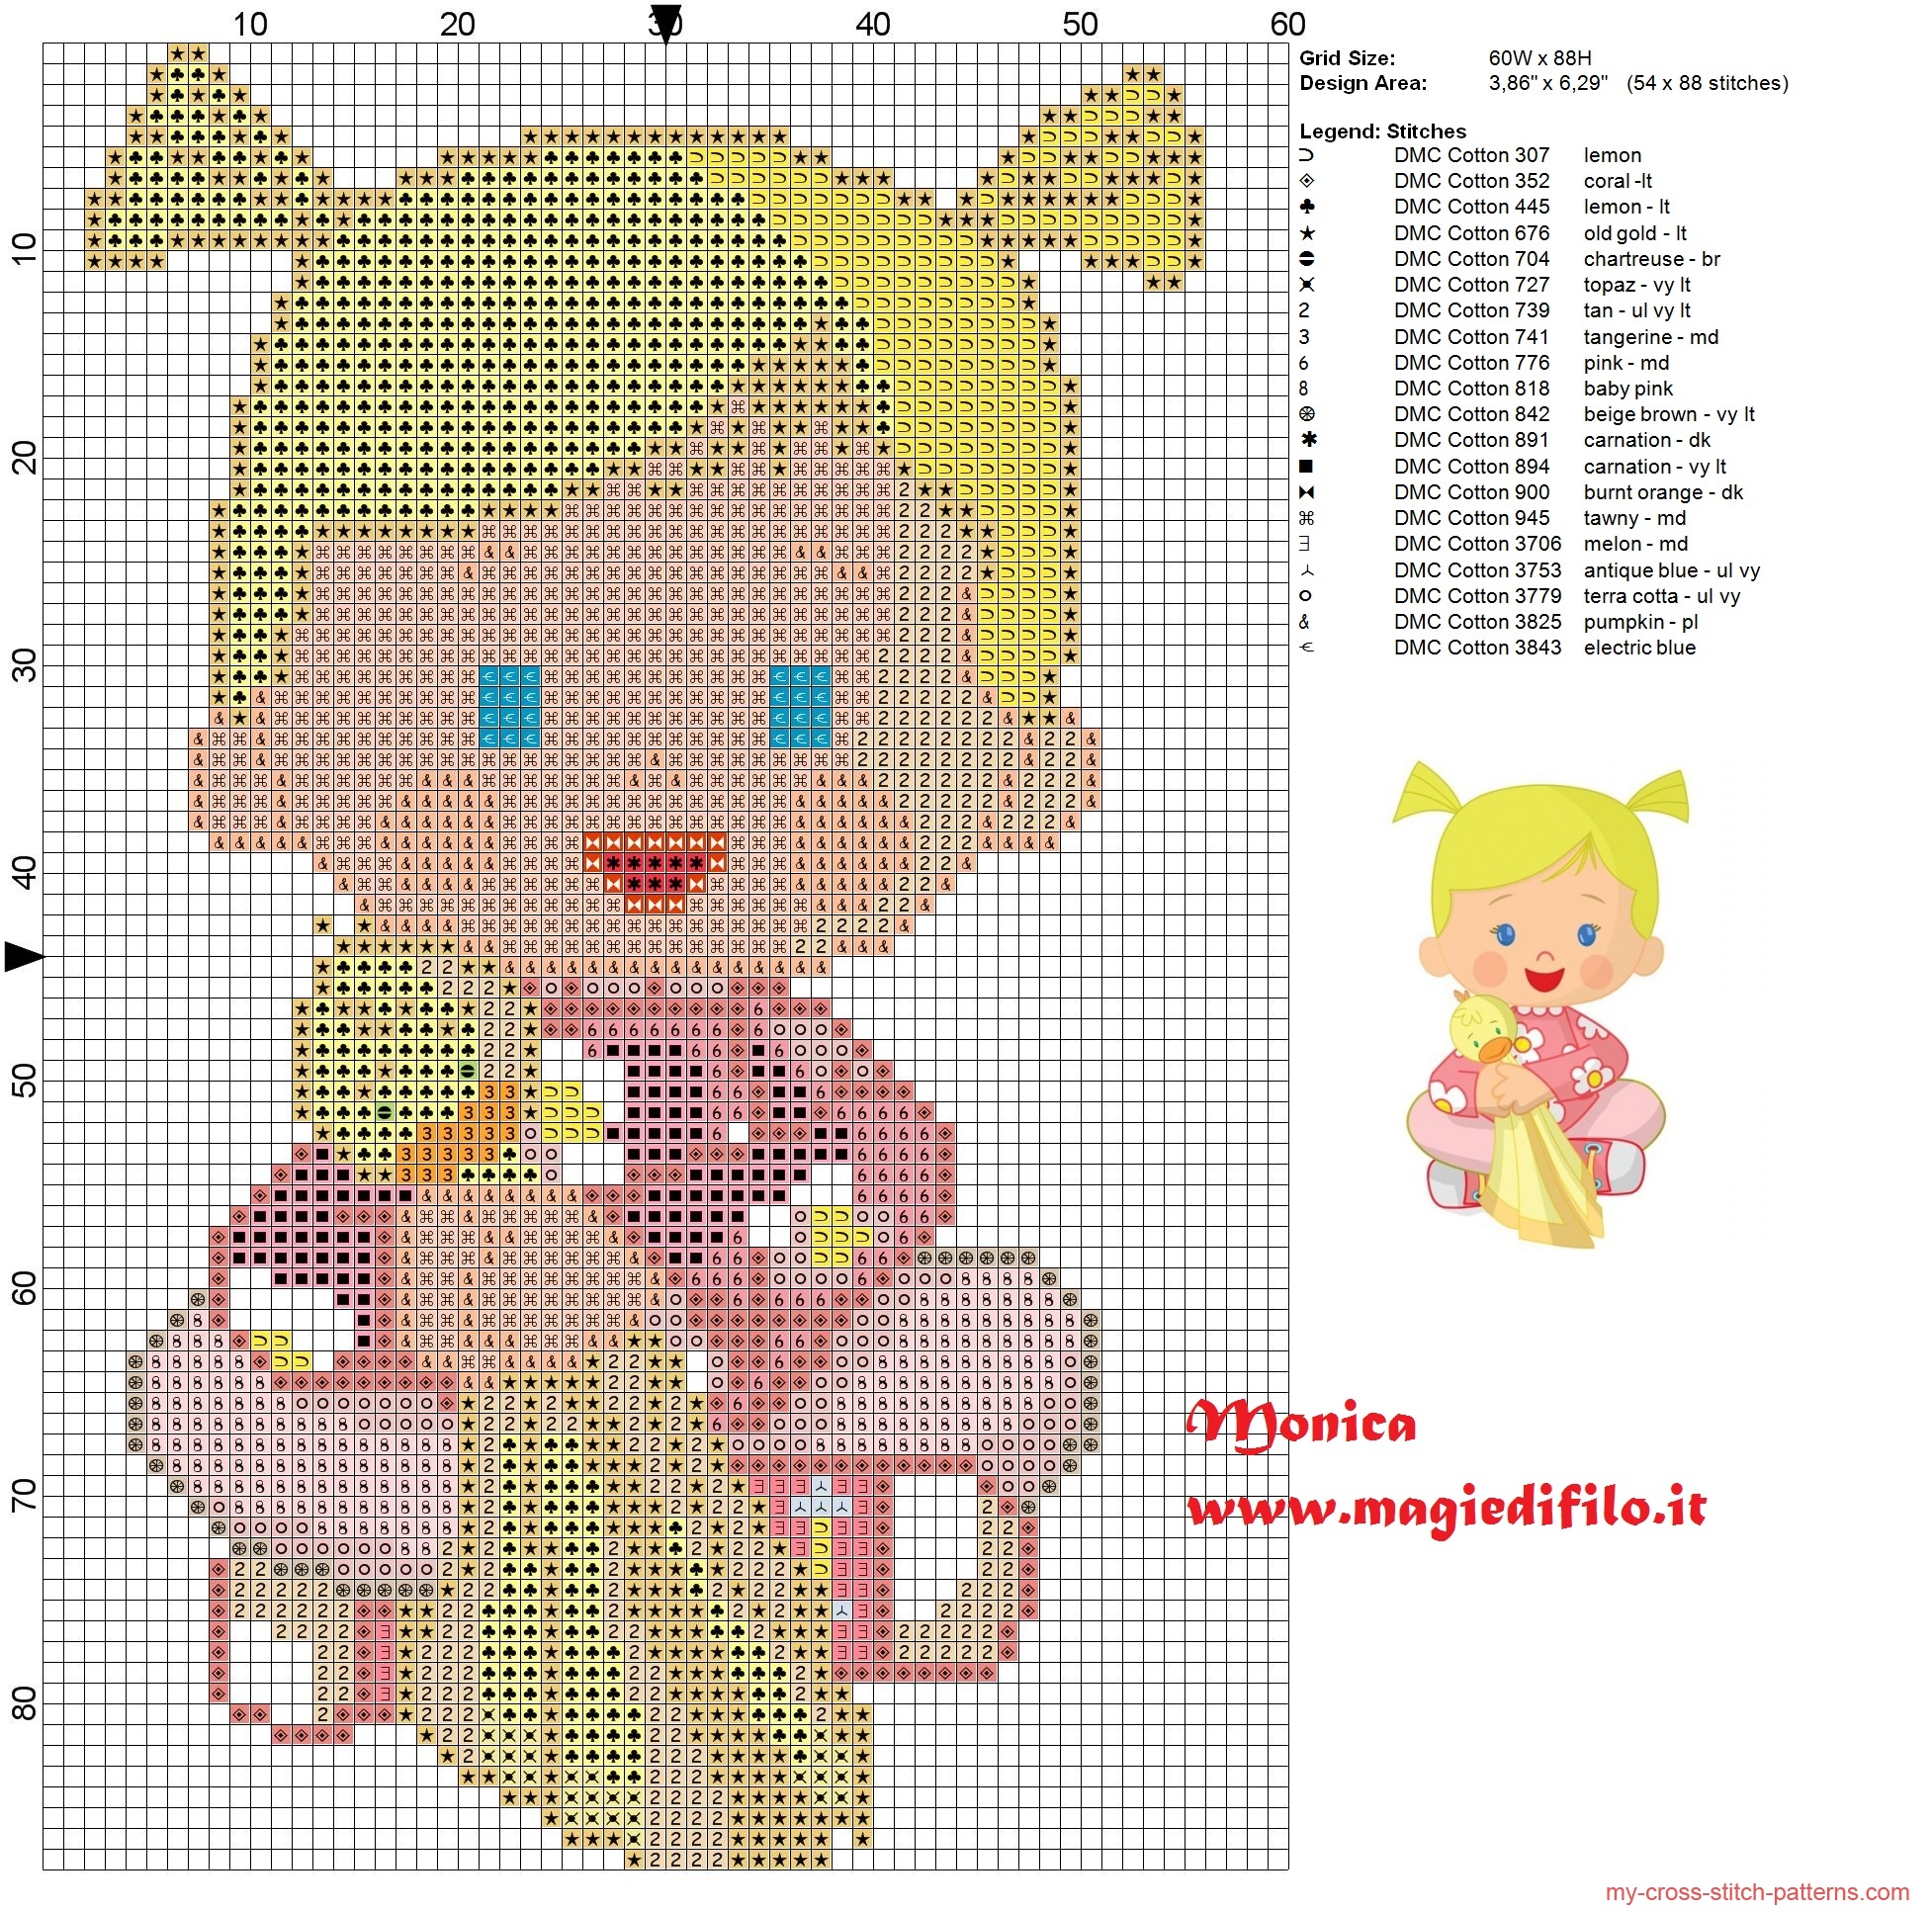 chloe_with_lovely_carrot_chloes_closet_cross_stitch_pattern